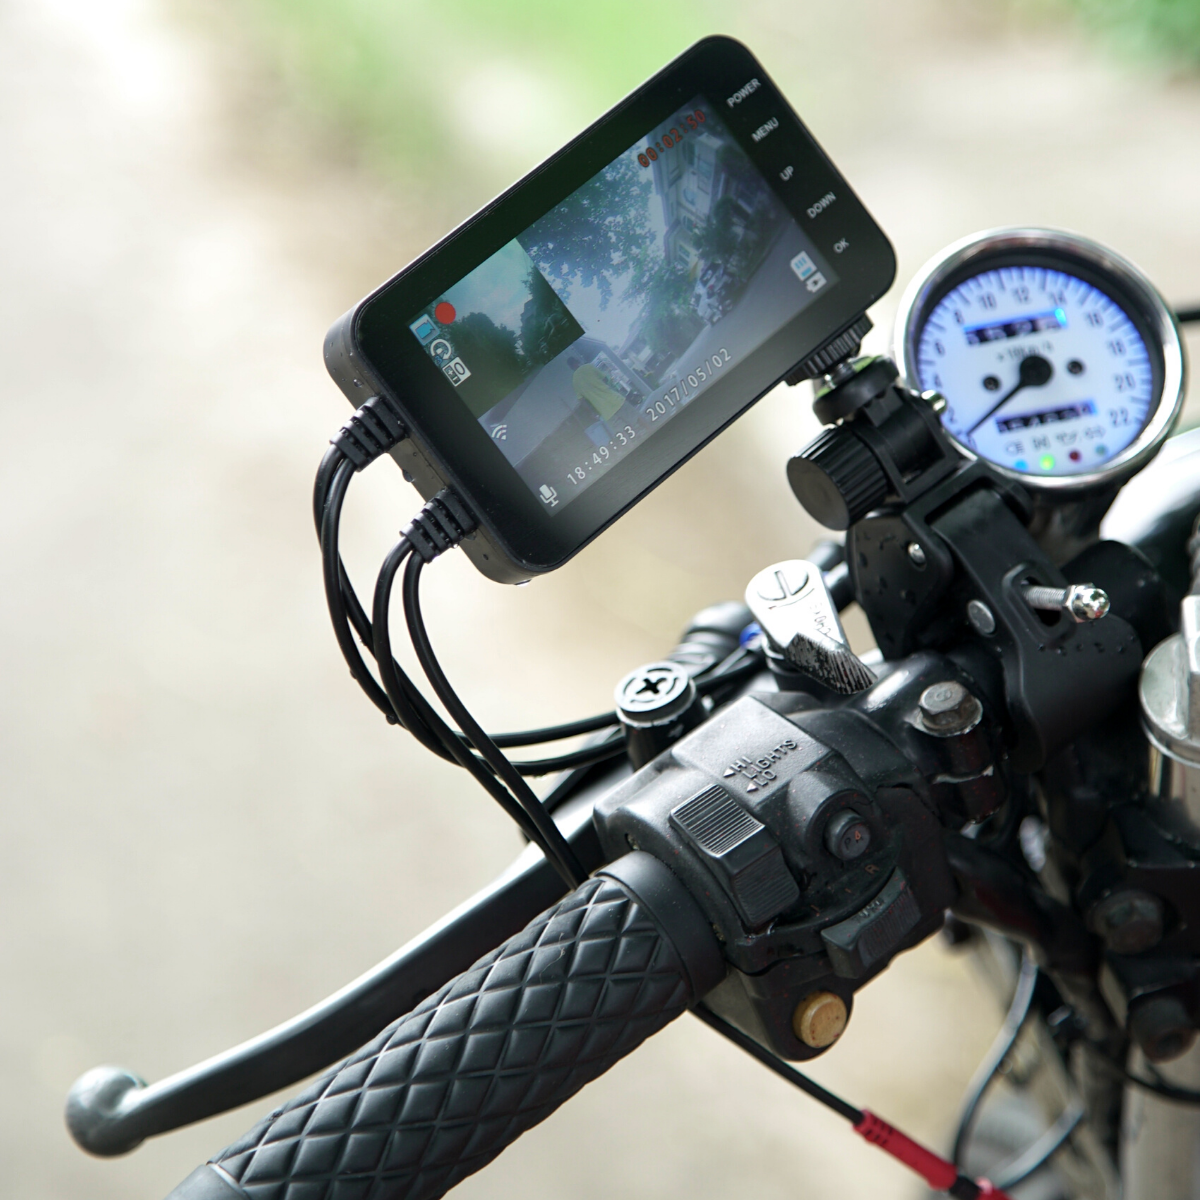 A Motorcycle Dual Lens Dash Camera Video Recorder 4 Inch HD 1080P attached to the handlebars.